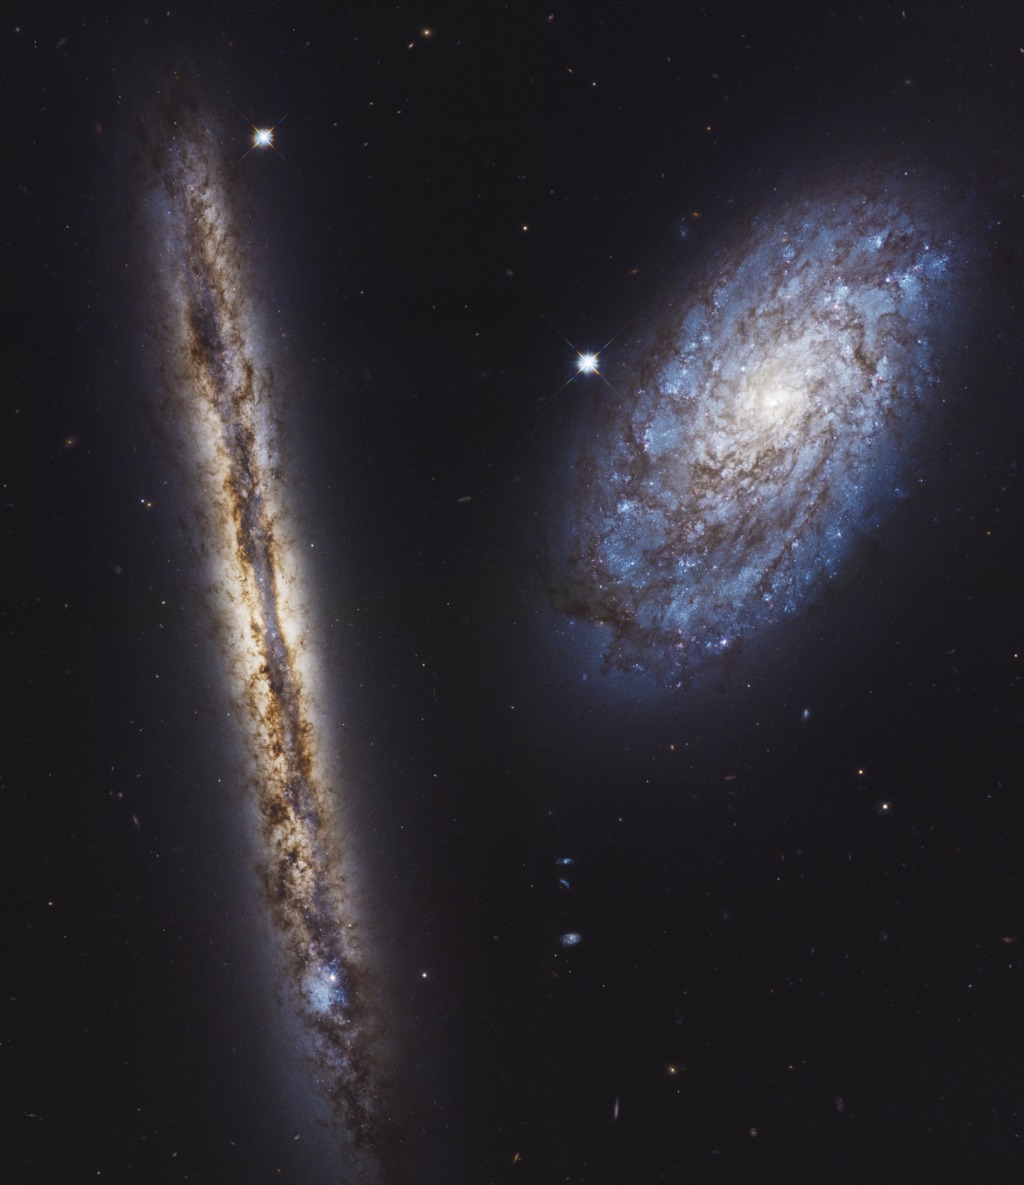 Spiral galaxies NGC 4302 and NGC 498 are similar in shape, but appear different due to their different observed orientations.